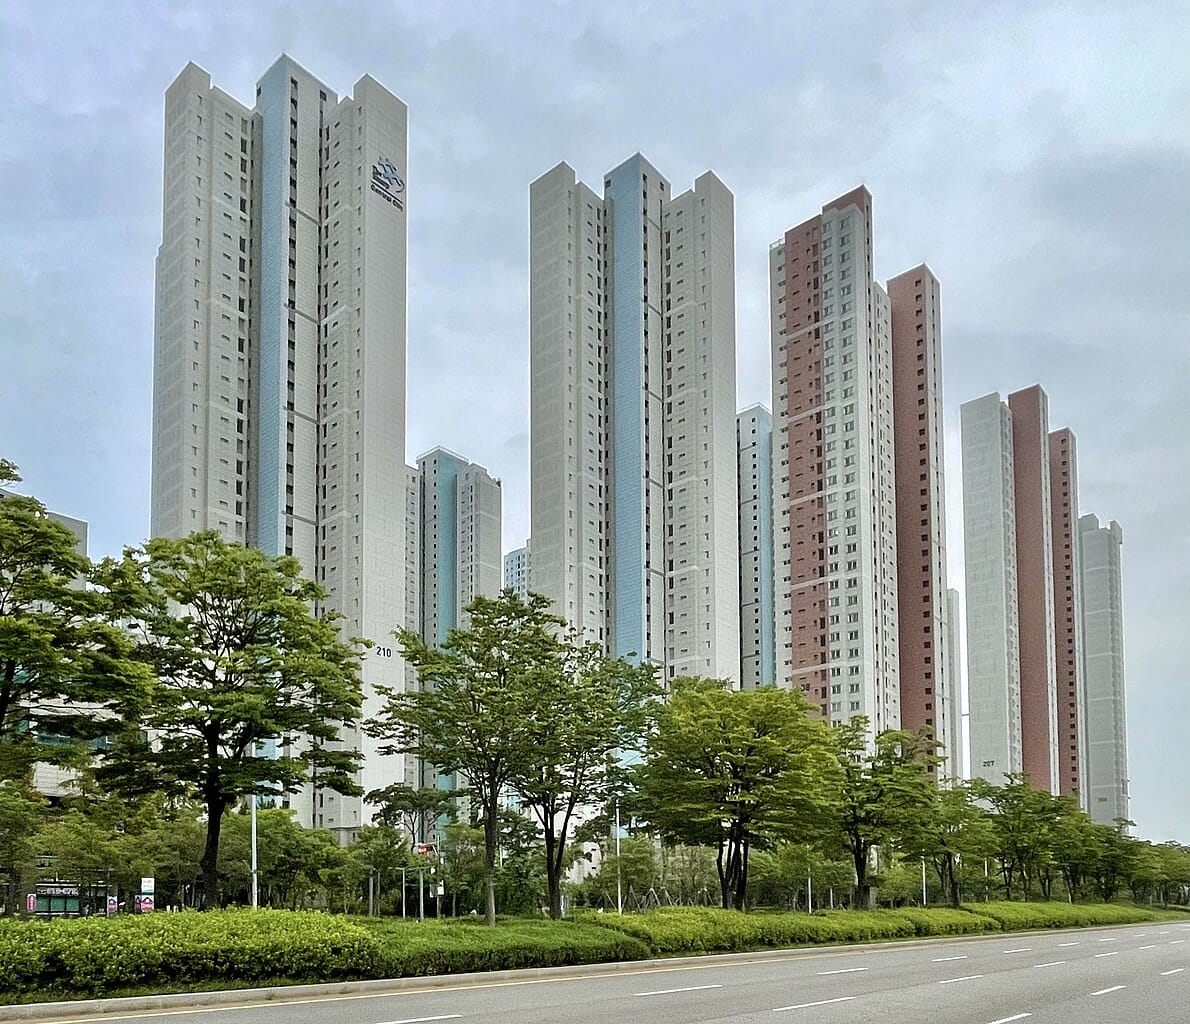 A residential area in Incheon, South Korea.